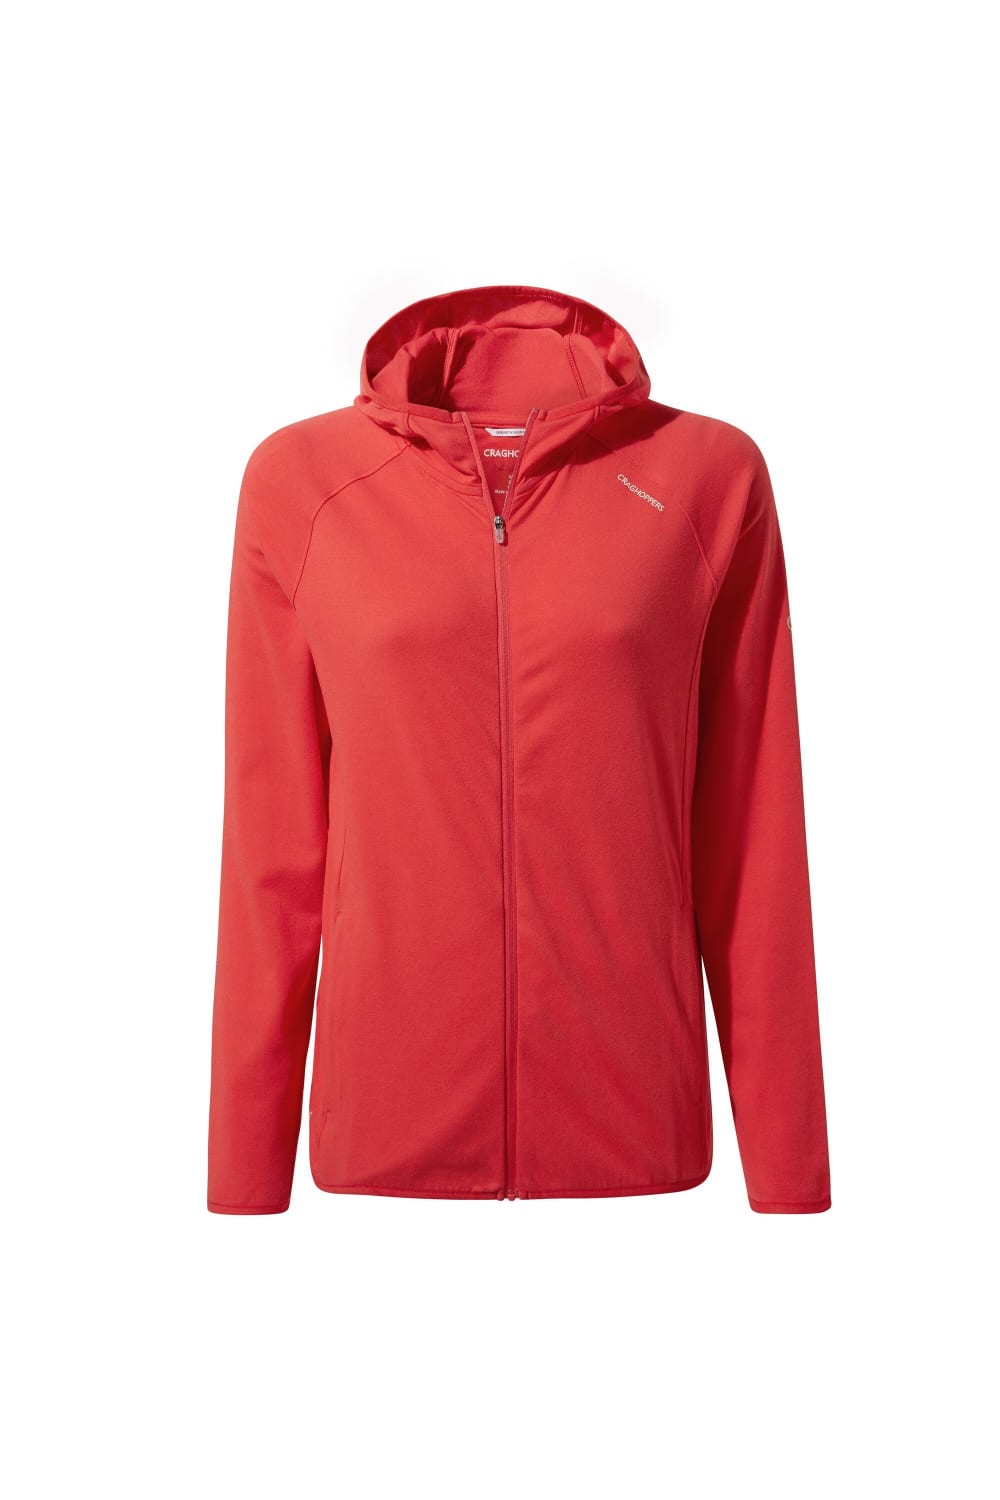 Craghoppers Womens/Ladies NosiLife Nilo Hooded Top